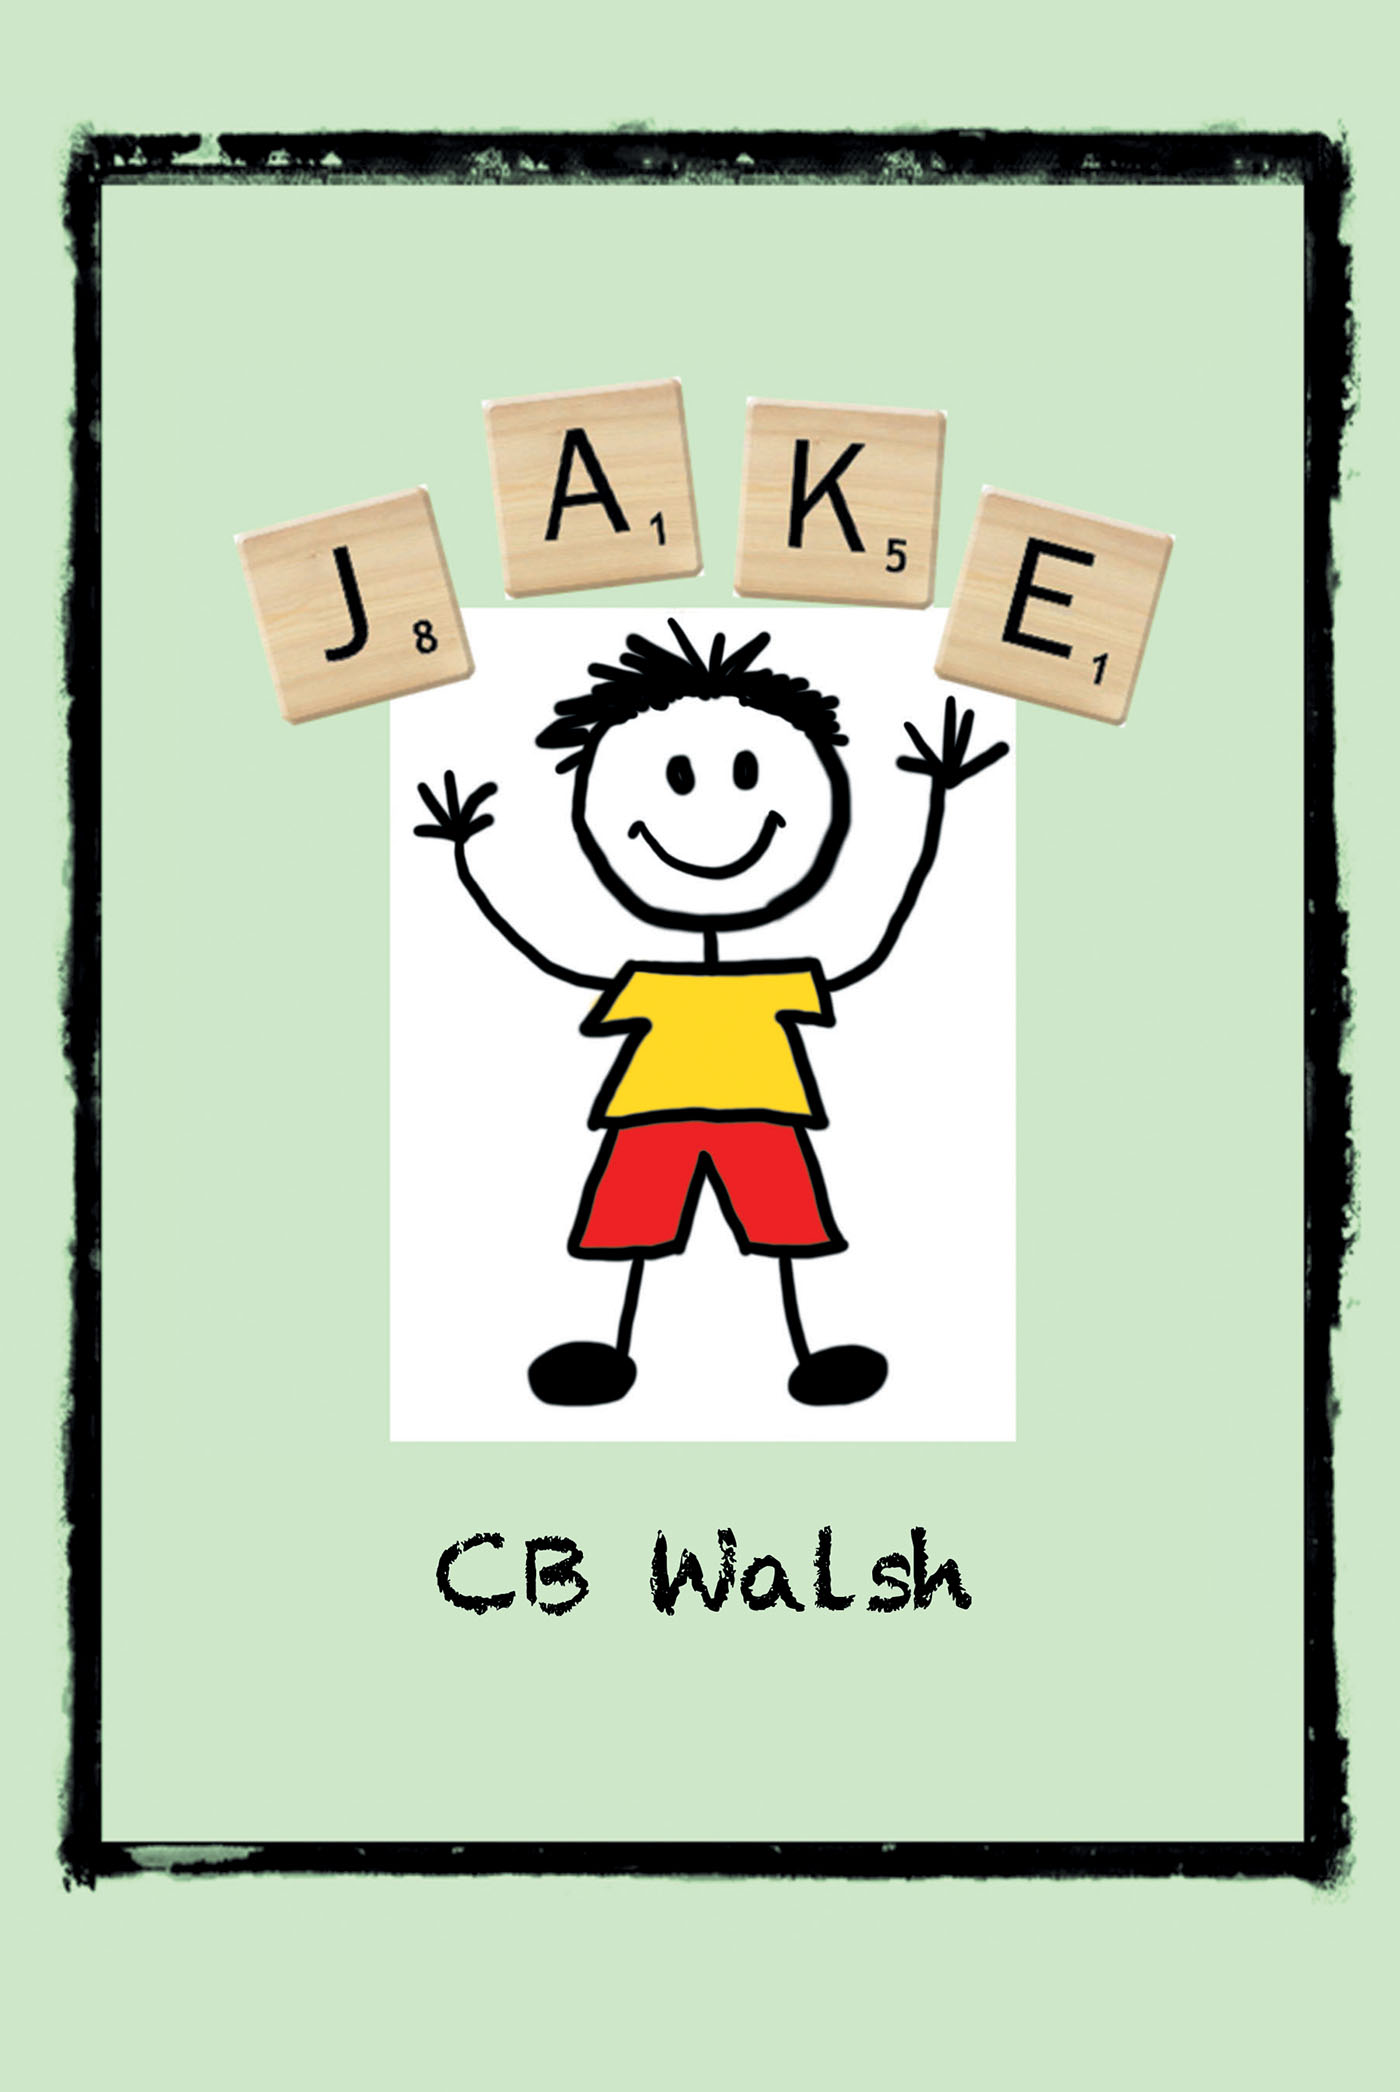 Jake Cover Image